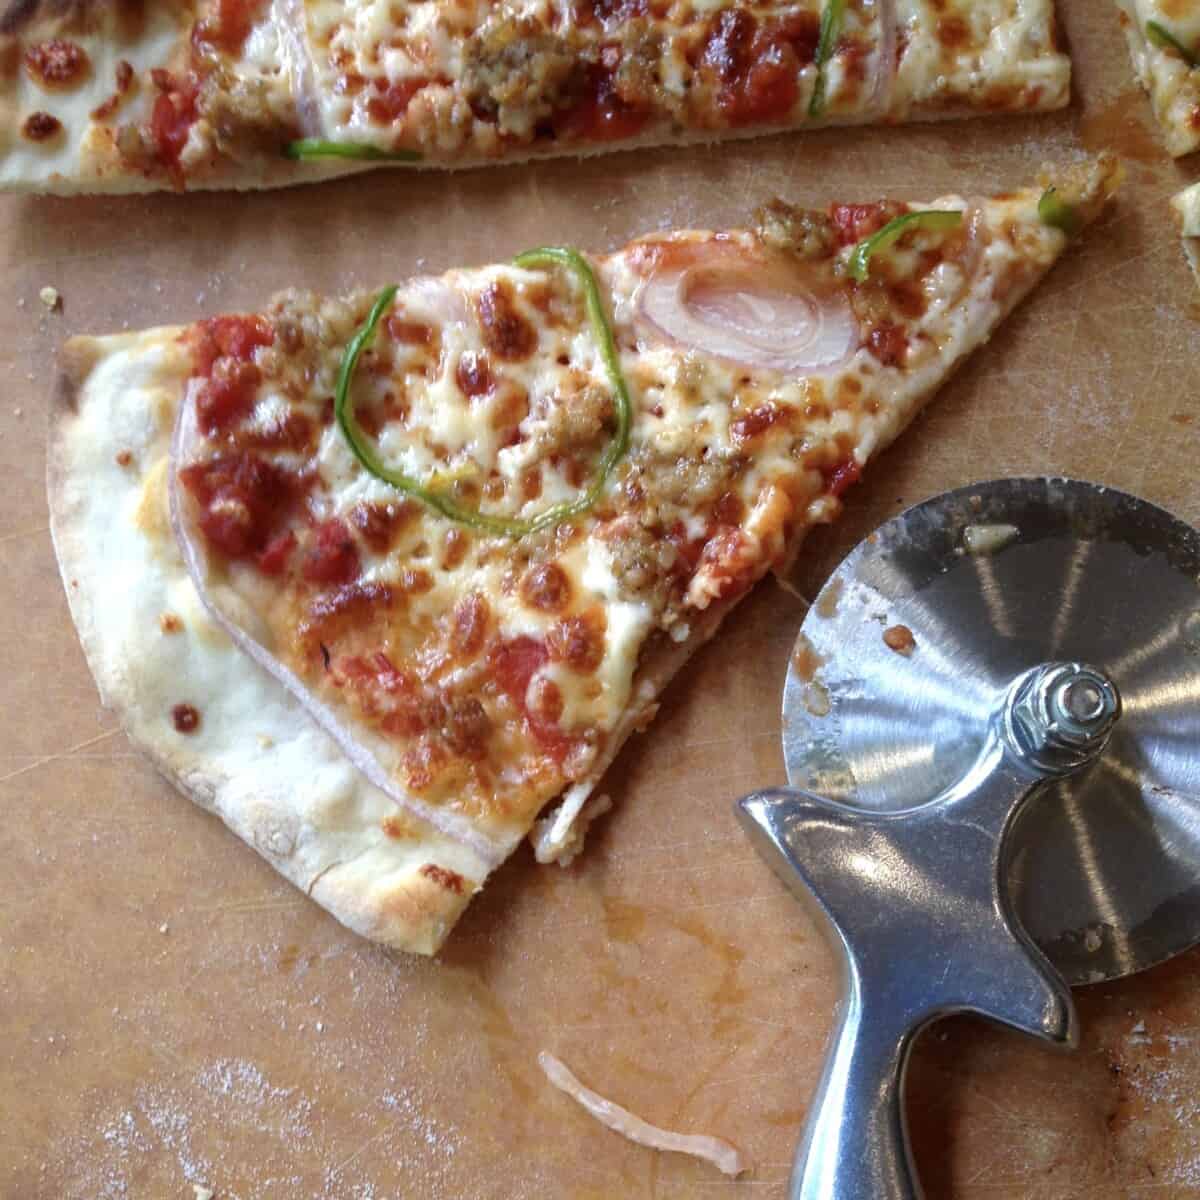 A thin crust pizza with a pale crust because no sugar was added to the pizza dough.